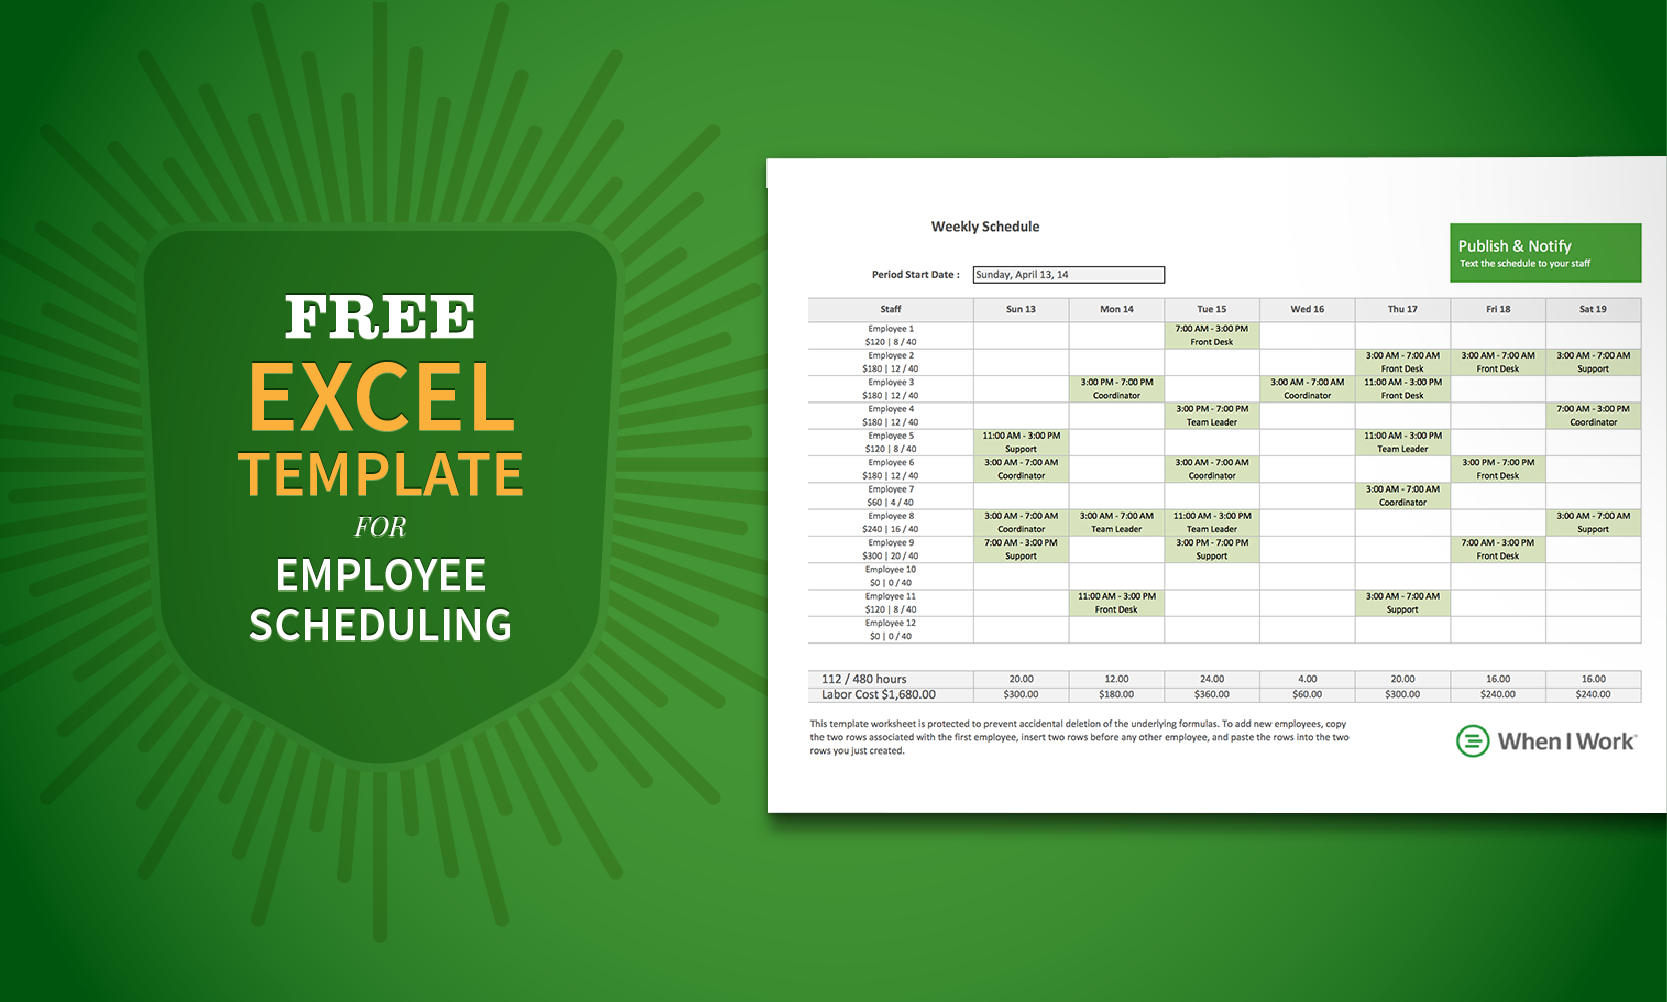 Staffing Forecast Spreadsheet with Free Excel Template For Employee Scheduling  When I Work